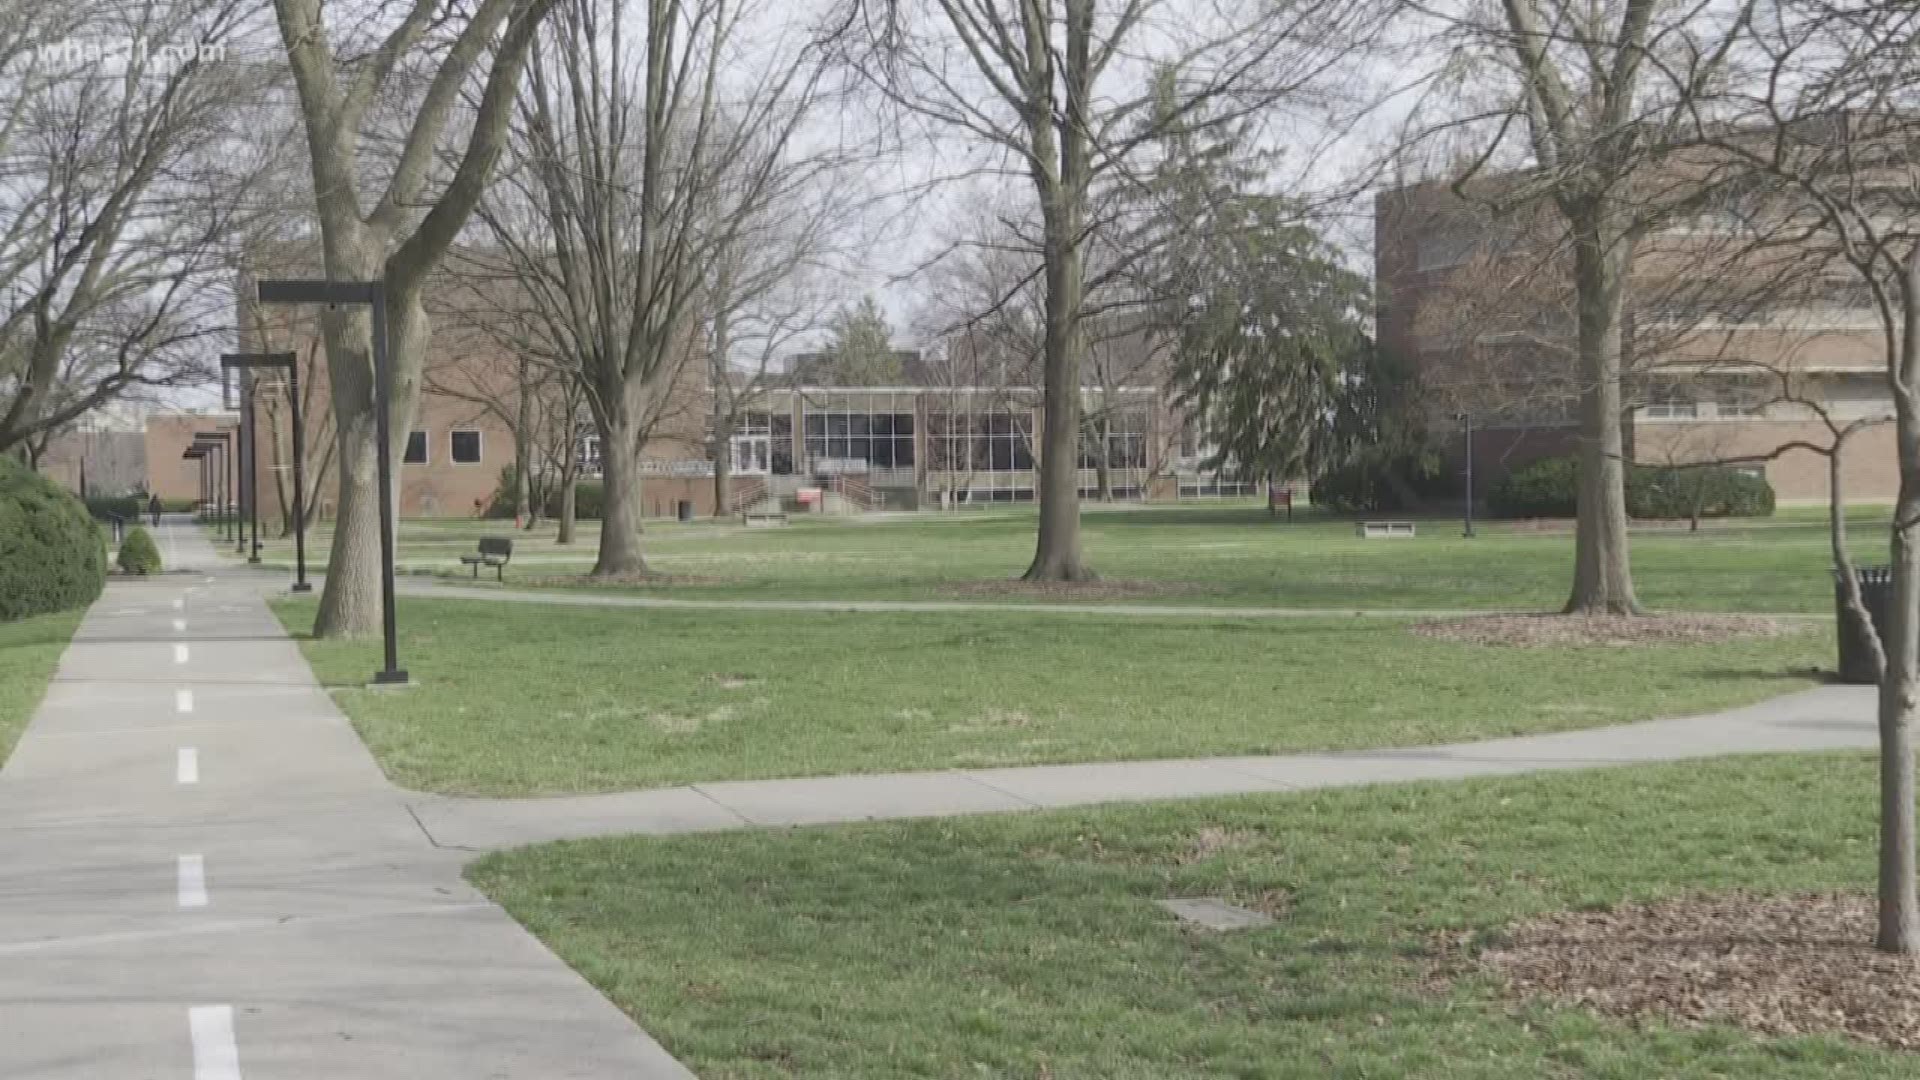 As coronavirus concerns grow, the University of Louisville is extending spring break for students and moving the classroom online.